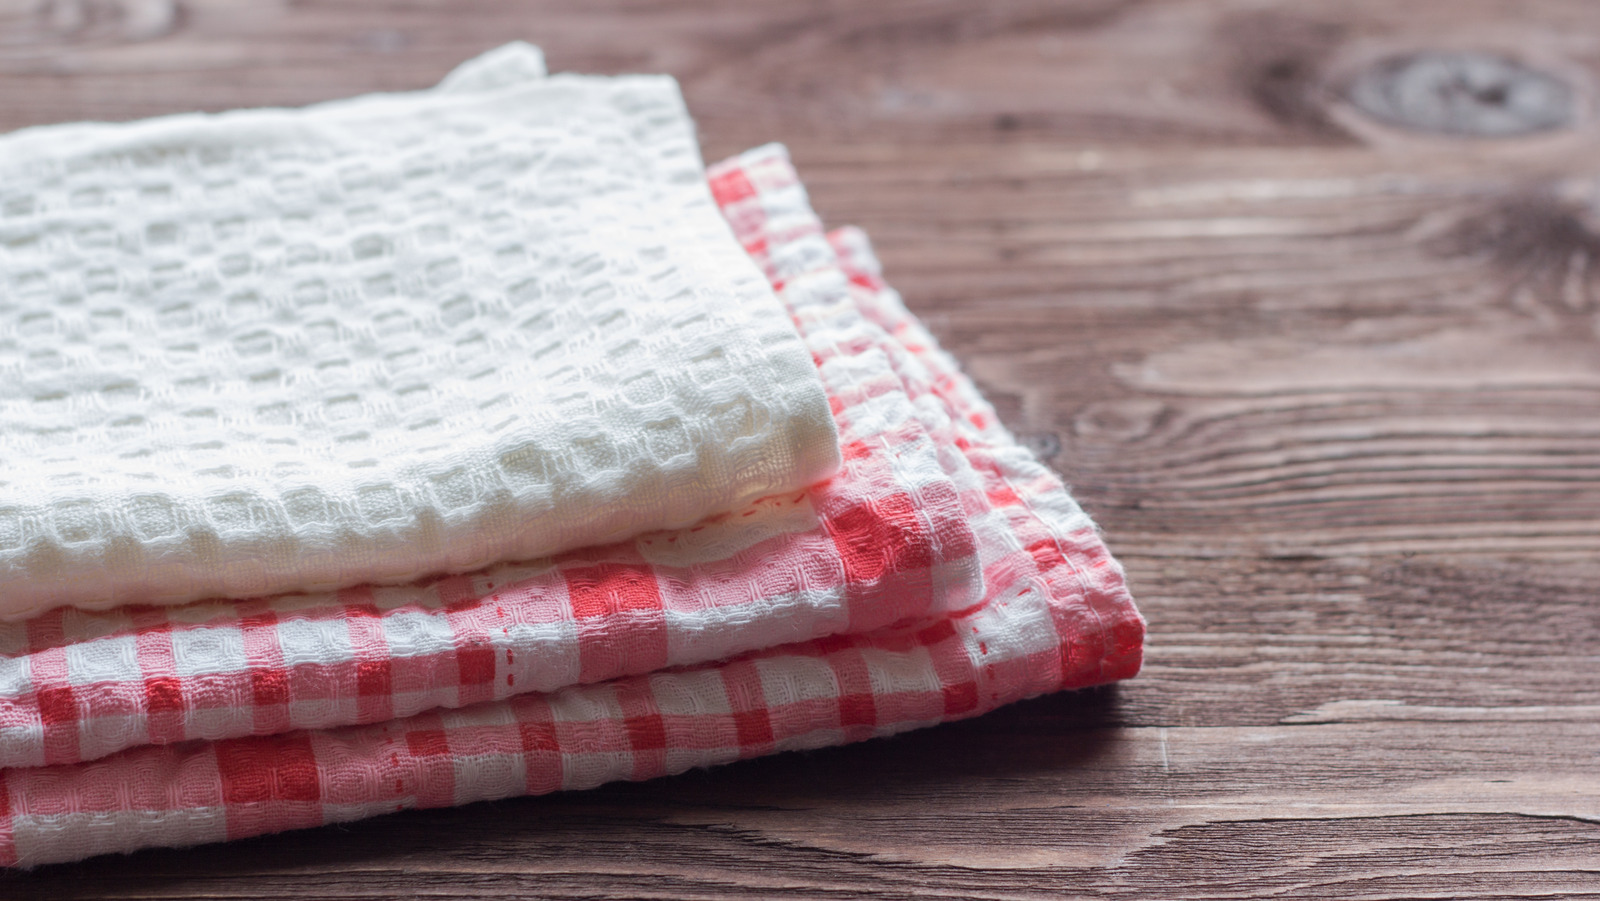 Dealing with Dirty Dish Towels - The Homes I Have Made